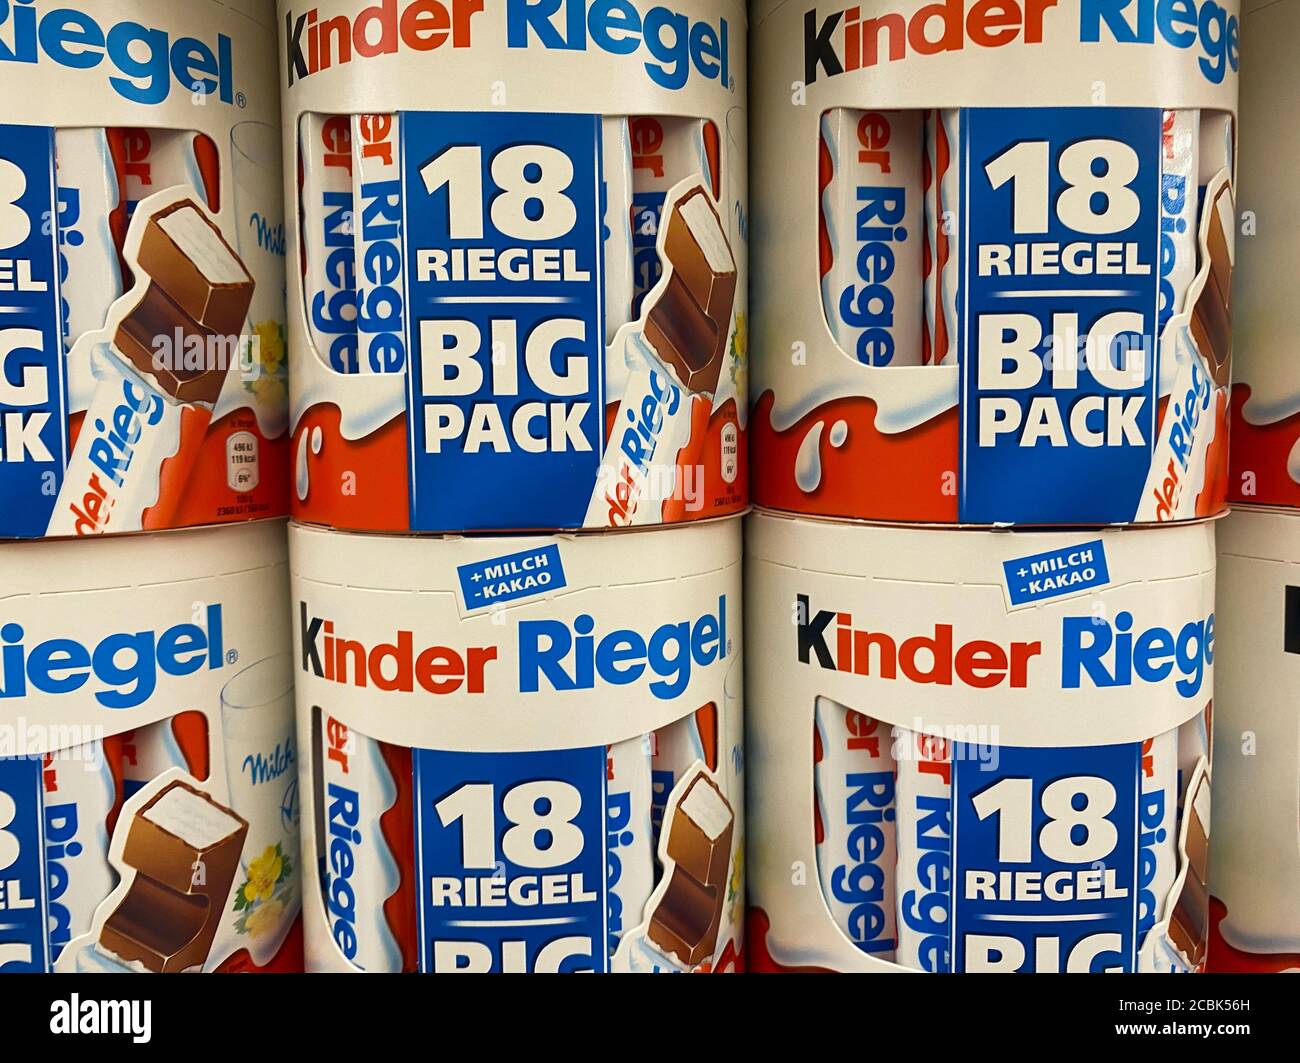 Viersen, Germany - July 9. 2020: View on stack Kinder Riegel chocolate bar  boxes in shelf of german supermarket Stock Photo - Alamy